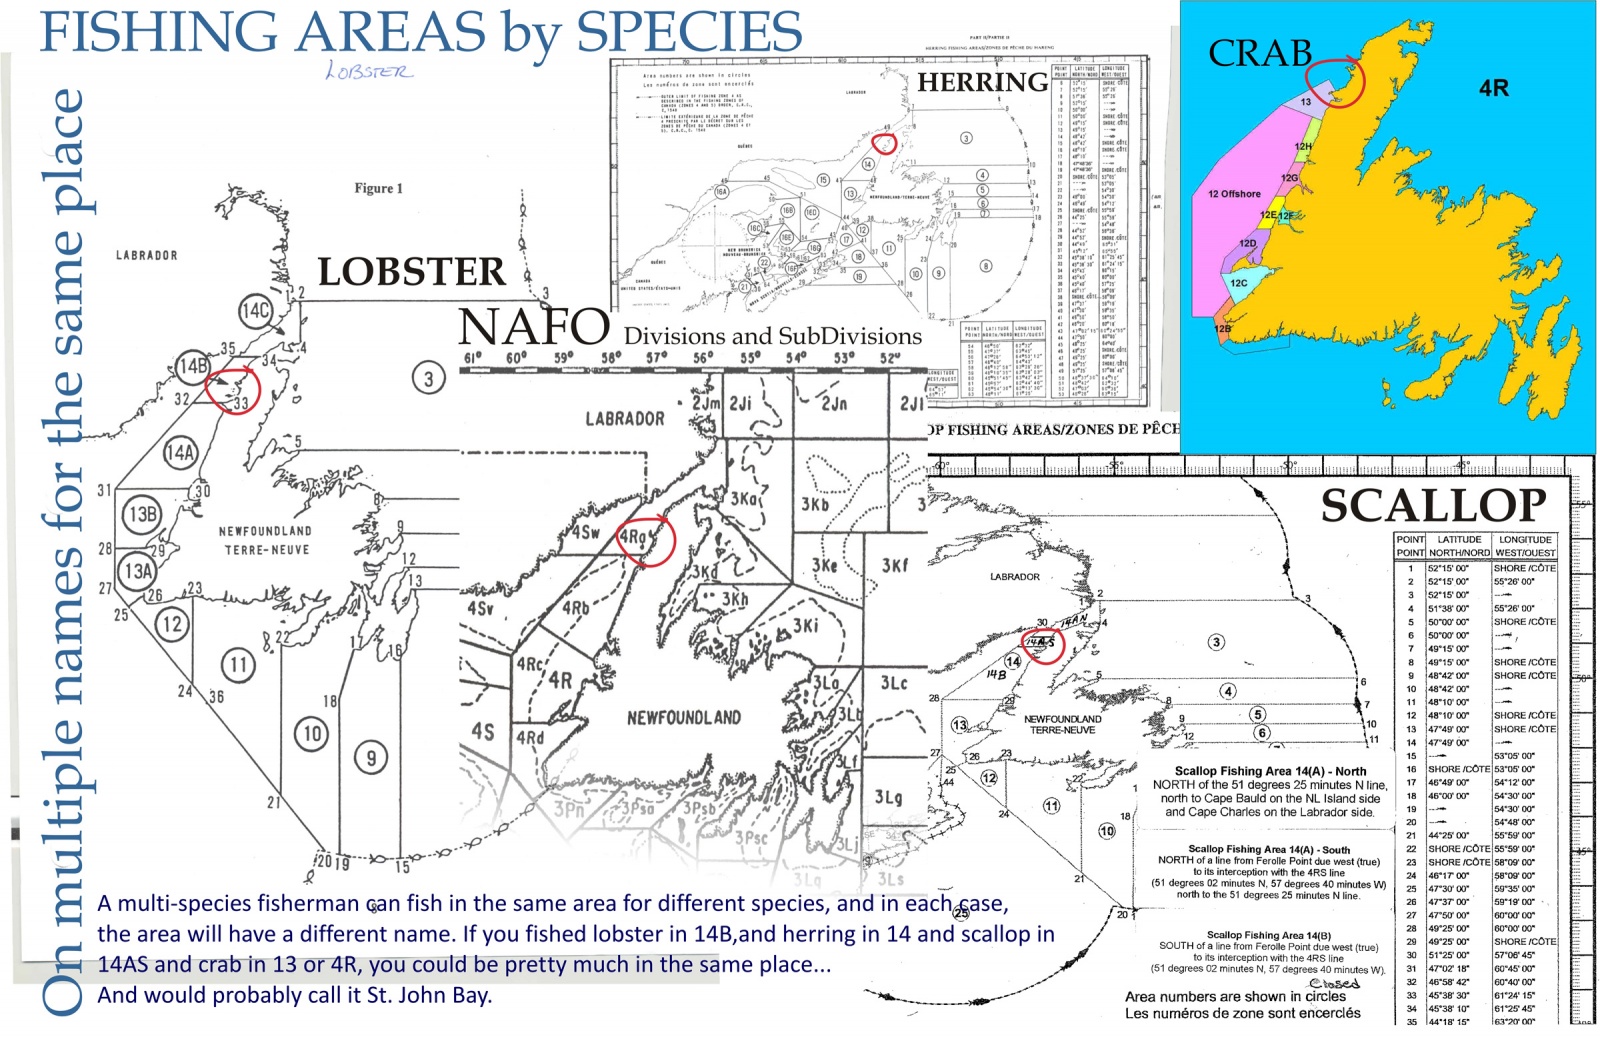 Fishing Areas by Species